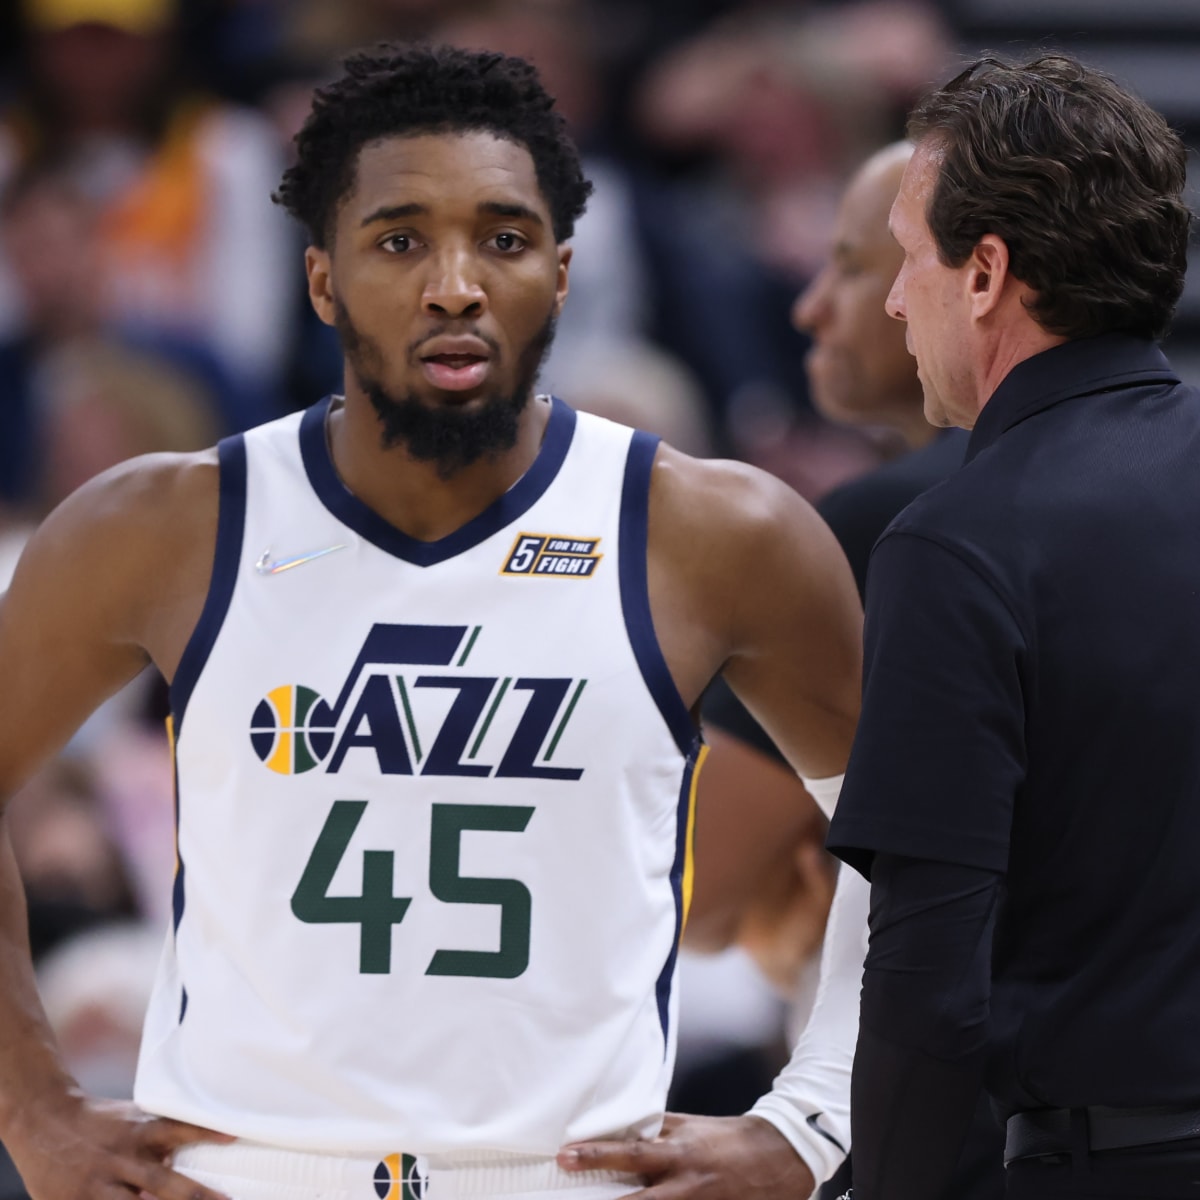 NBA All-Star: Donovan Mitchell will miss game due to illness